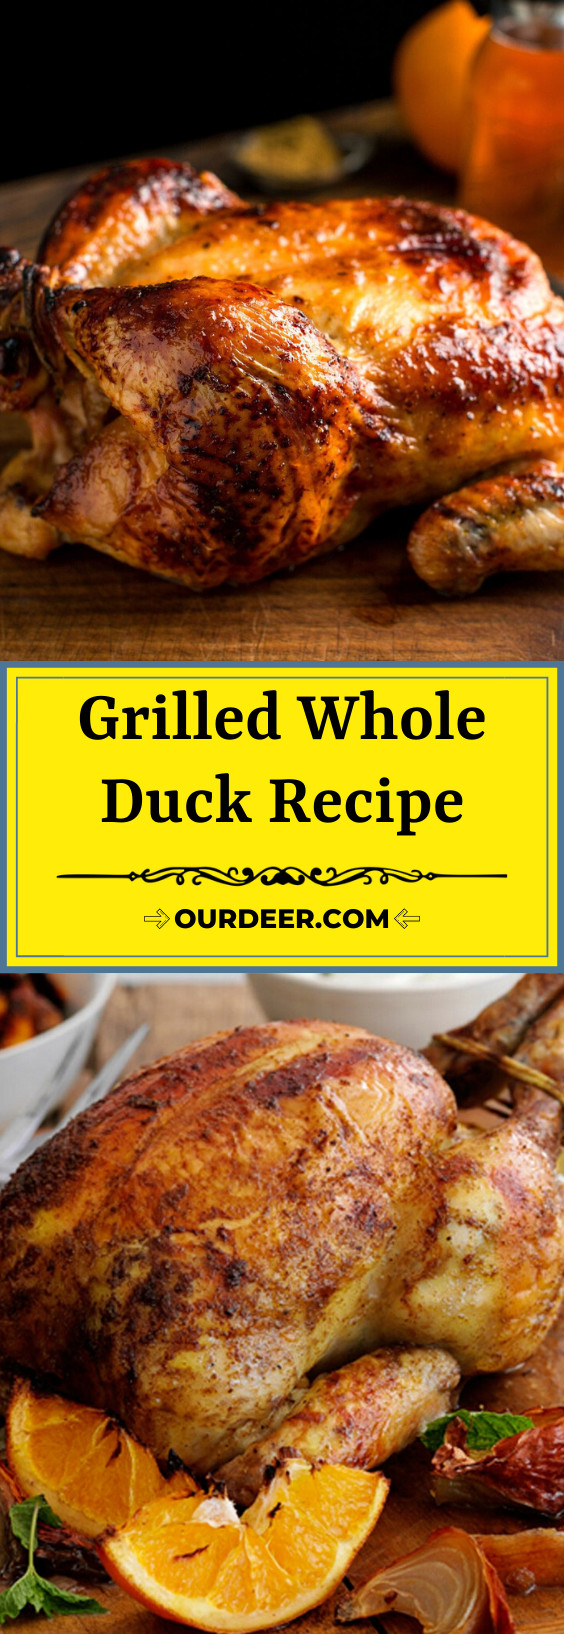 Duck Appetizer Recipes
 Grilled Whole Duck Recipe